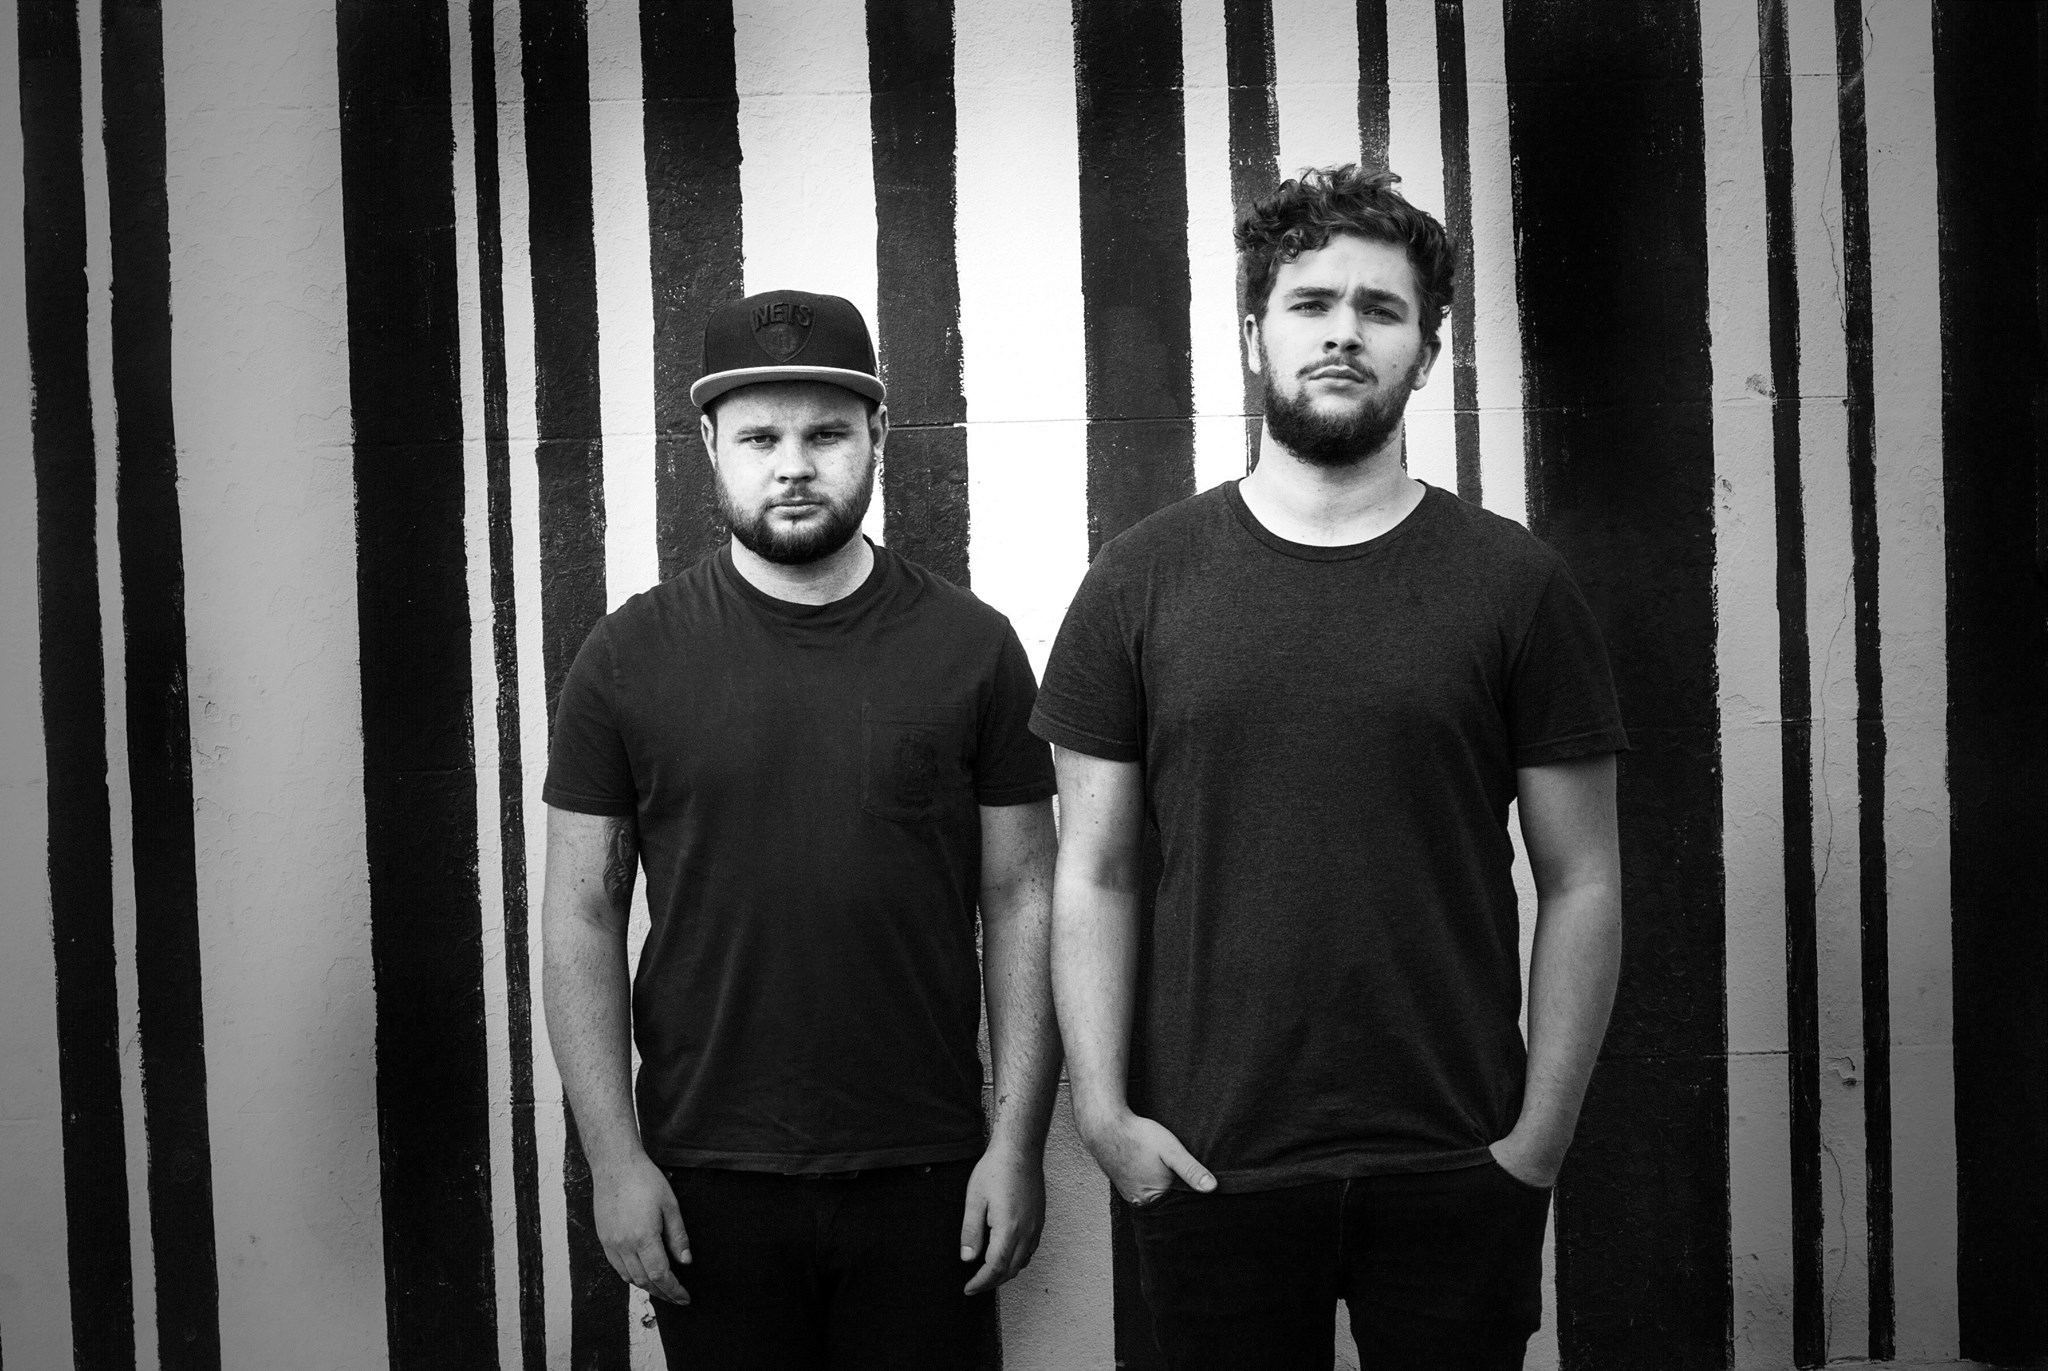 ROYAL BLOOD PREMIERE NEW MUSIC VIDEO FOR “FIGURE IT OUT”, DEBUT LP DUE OUT AUGUST 25